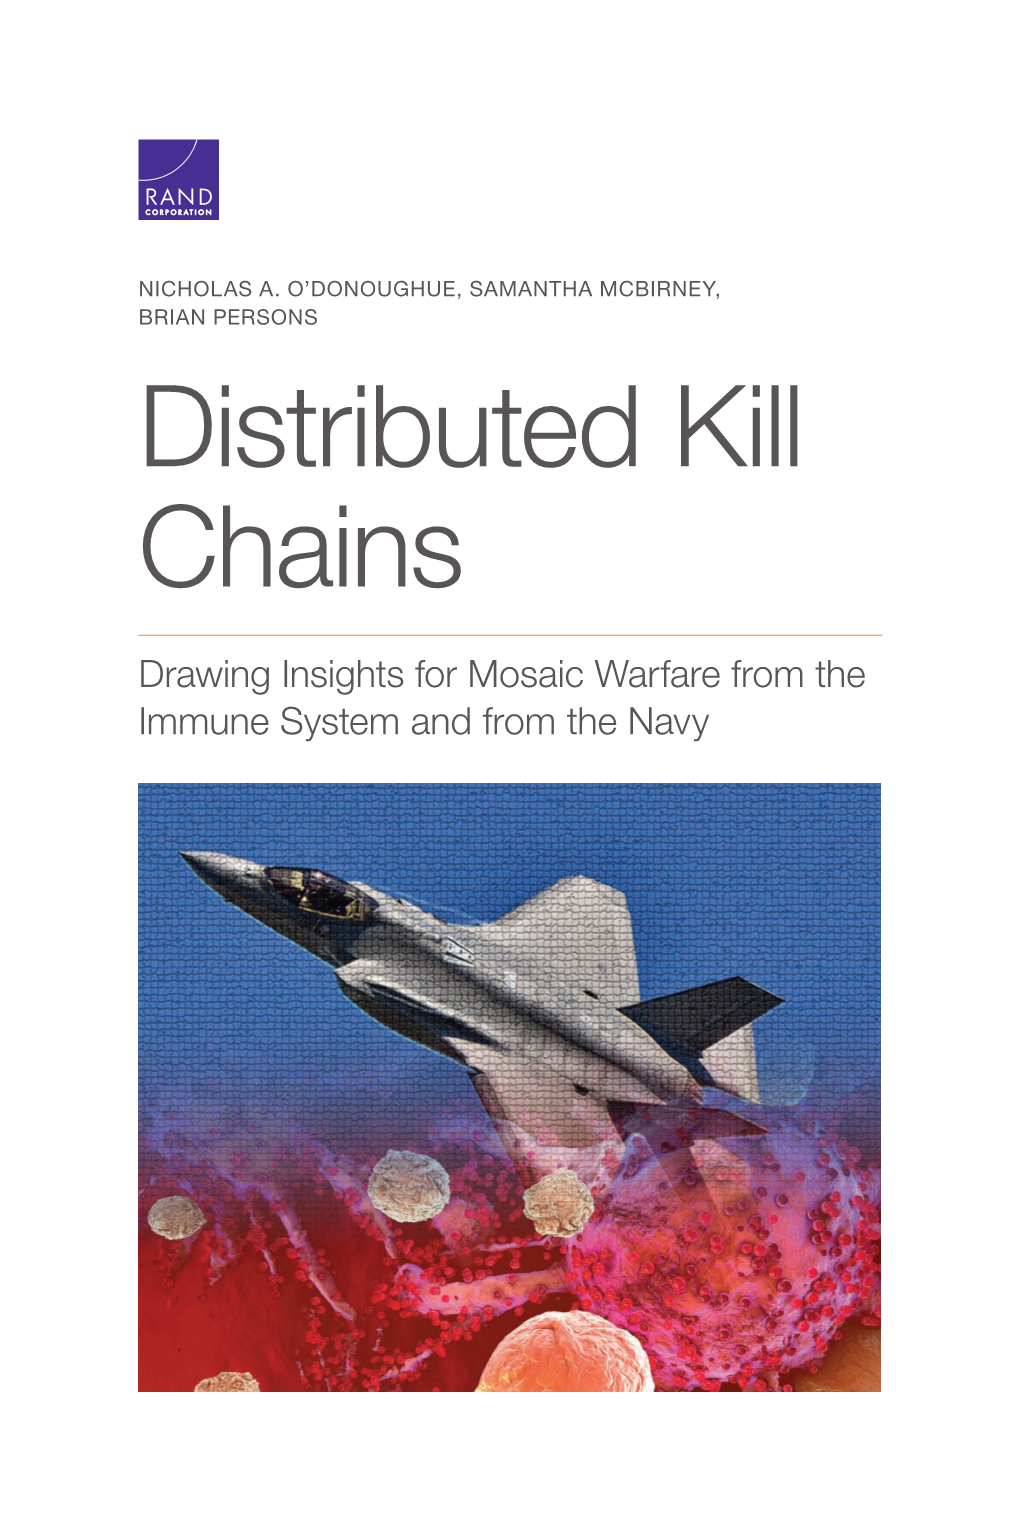 Distributed Kill Chains: Drawing Insights for Mosaic Warfare from the Immune System and from the Navy